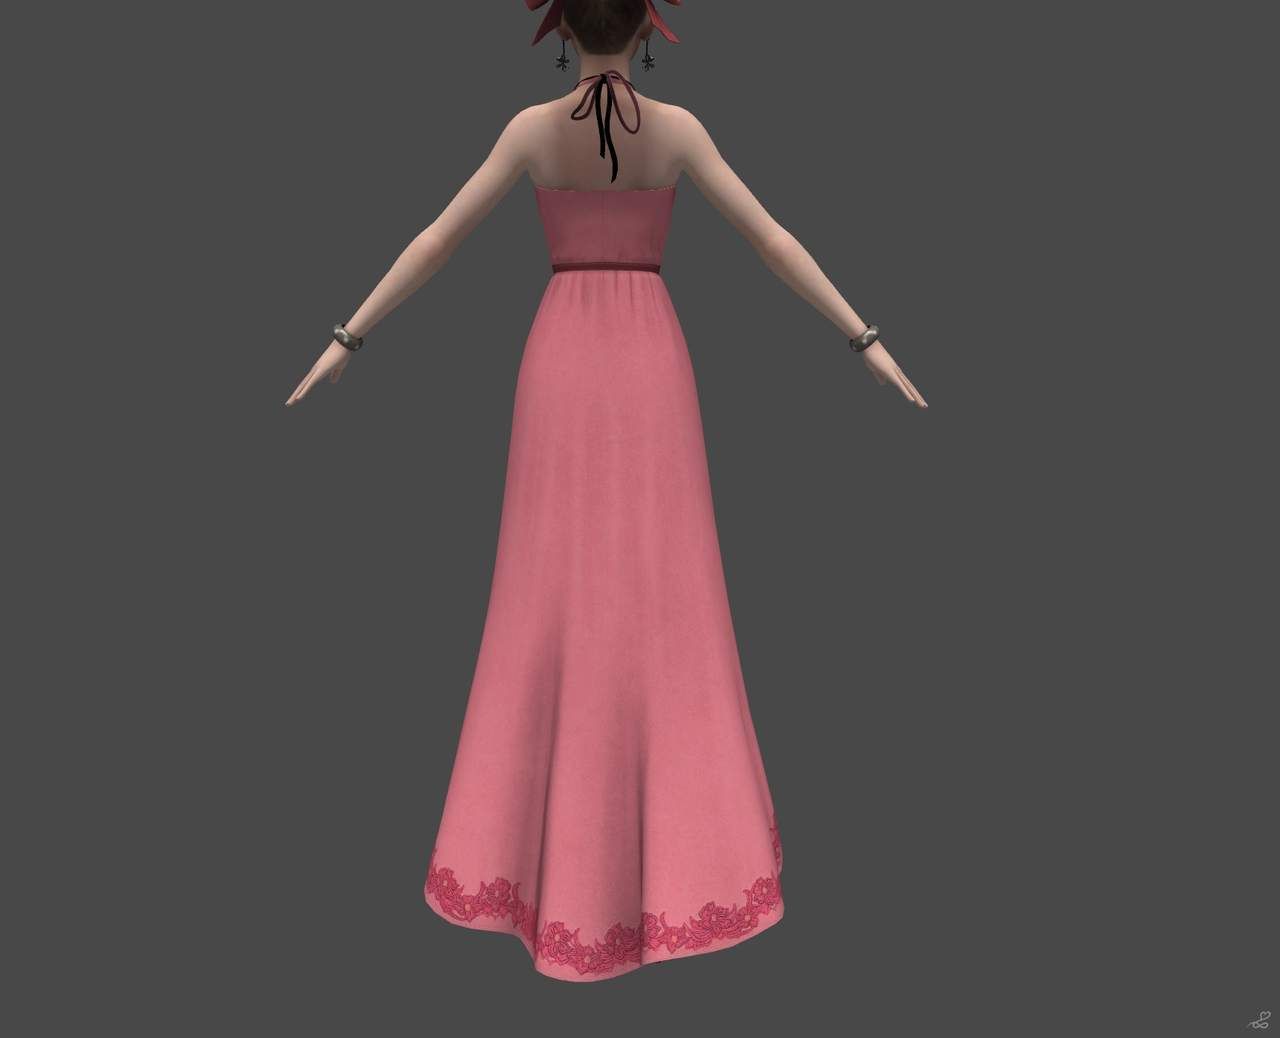 [J.A.] FF7 Remake | Aerith Reference 11